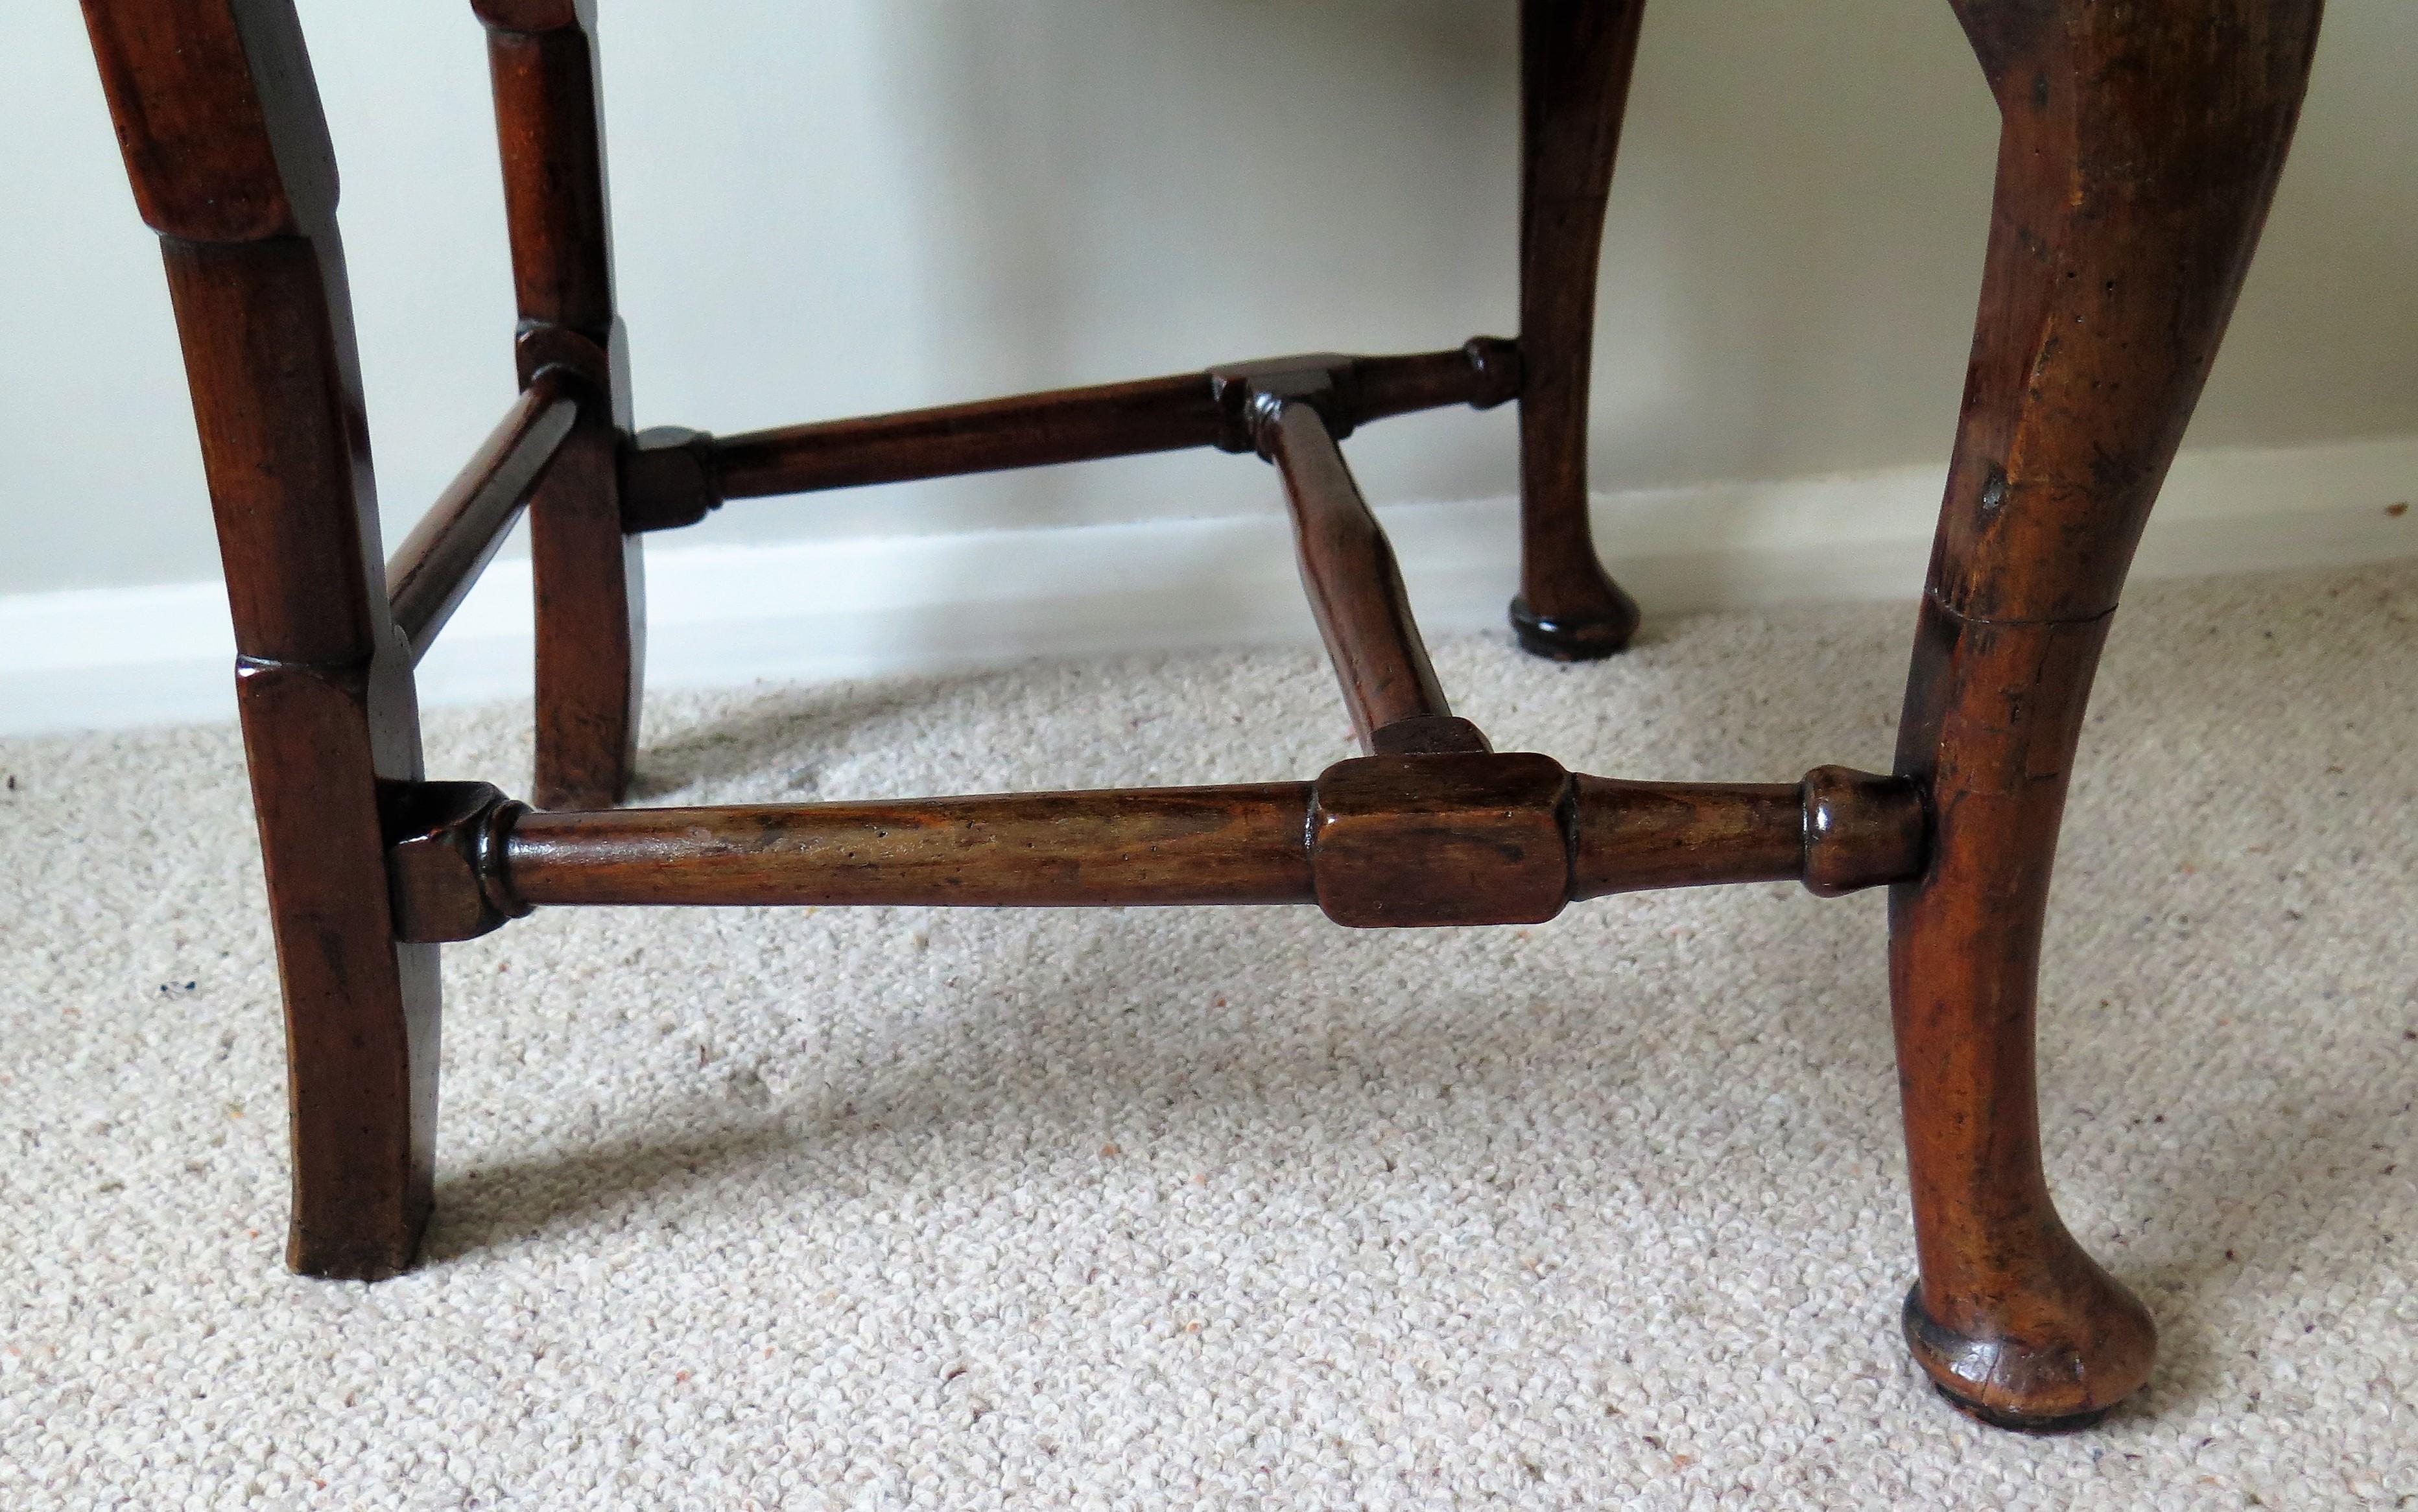 Queen Anne Period Walnut Chair Cabriole Legs and Stretchers, English circa 1700 For Sale 4